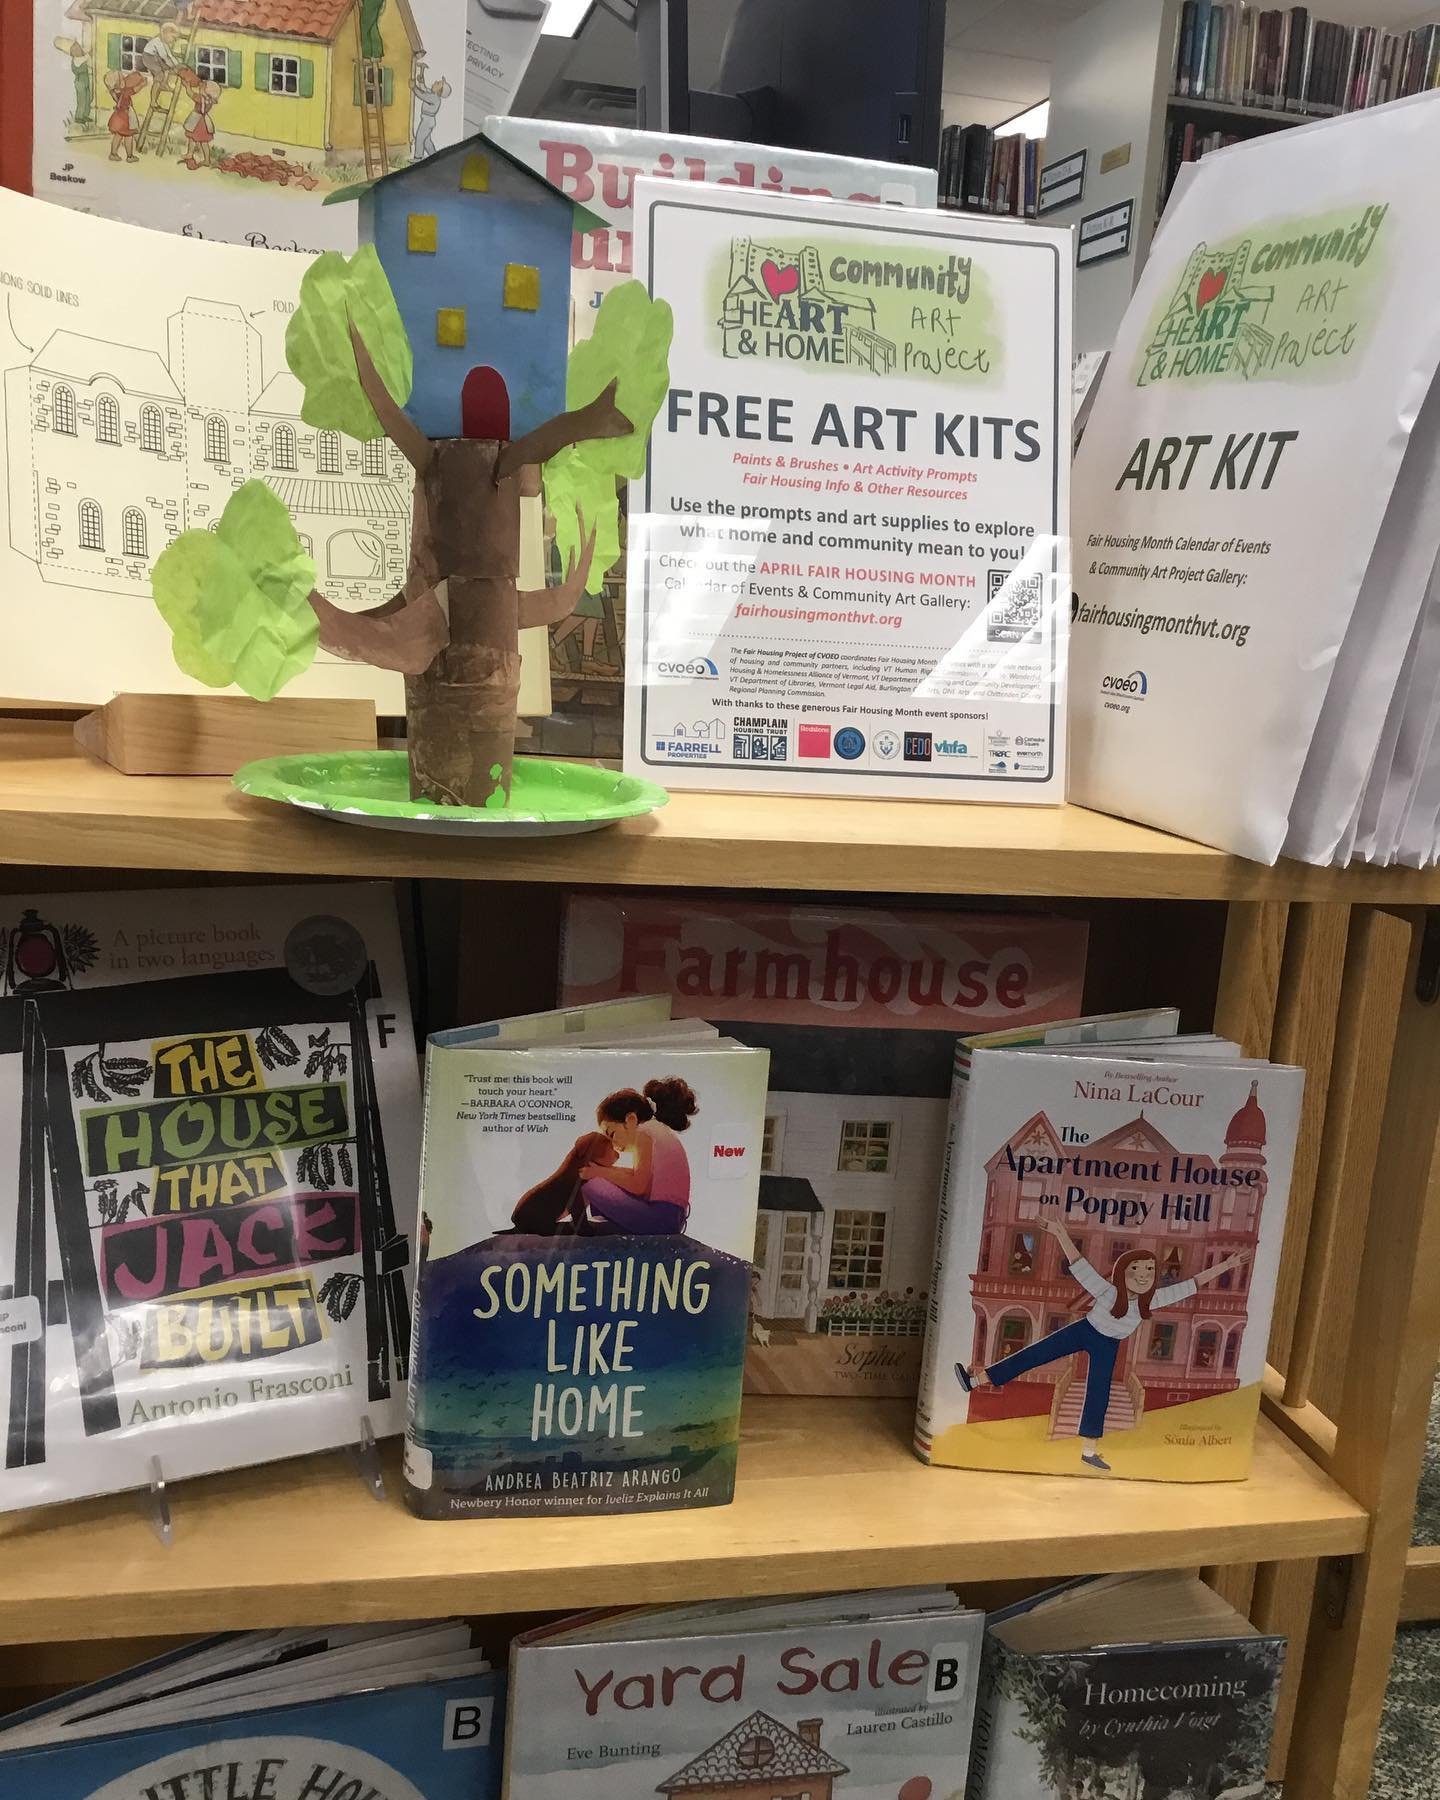 This month&rsquo;s after-school story and craft club read The House of Grass and Sky by Mary Lyn Ray and made treehouses and other dwellings. We also discussed Fair Housing Month and participants took home free art kits from The Heart and Home Commun